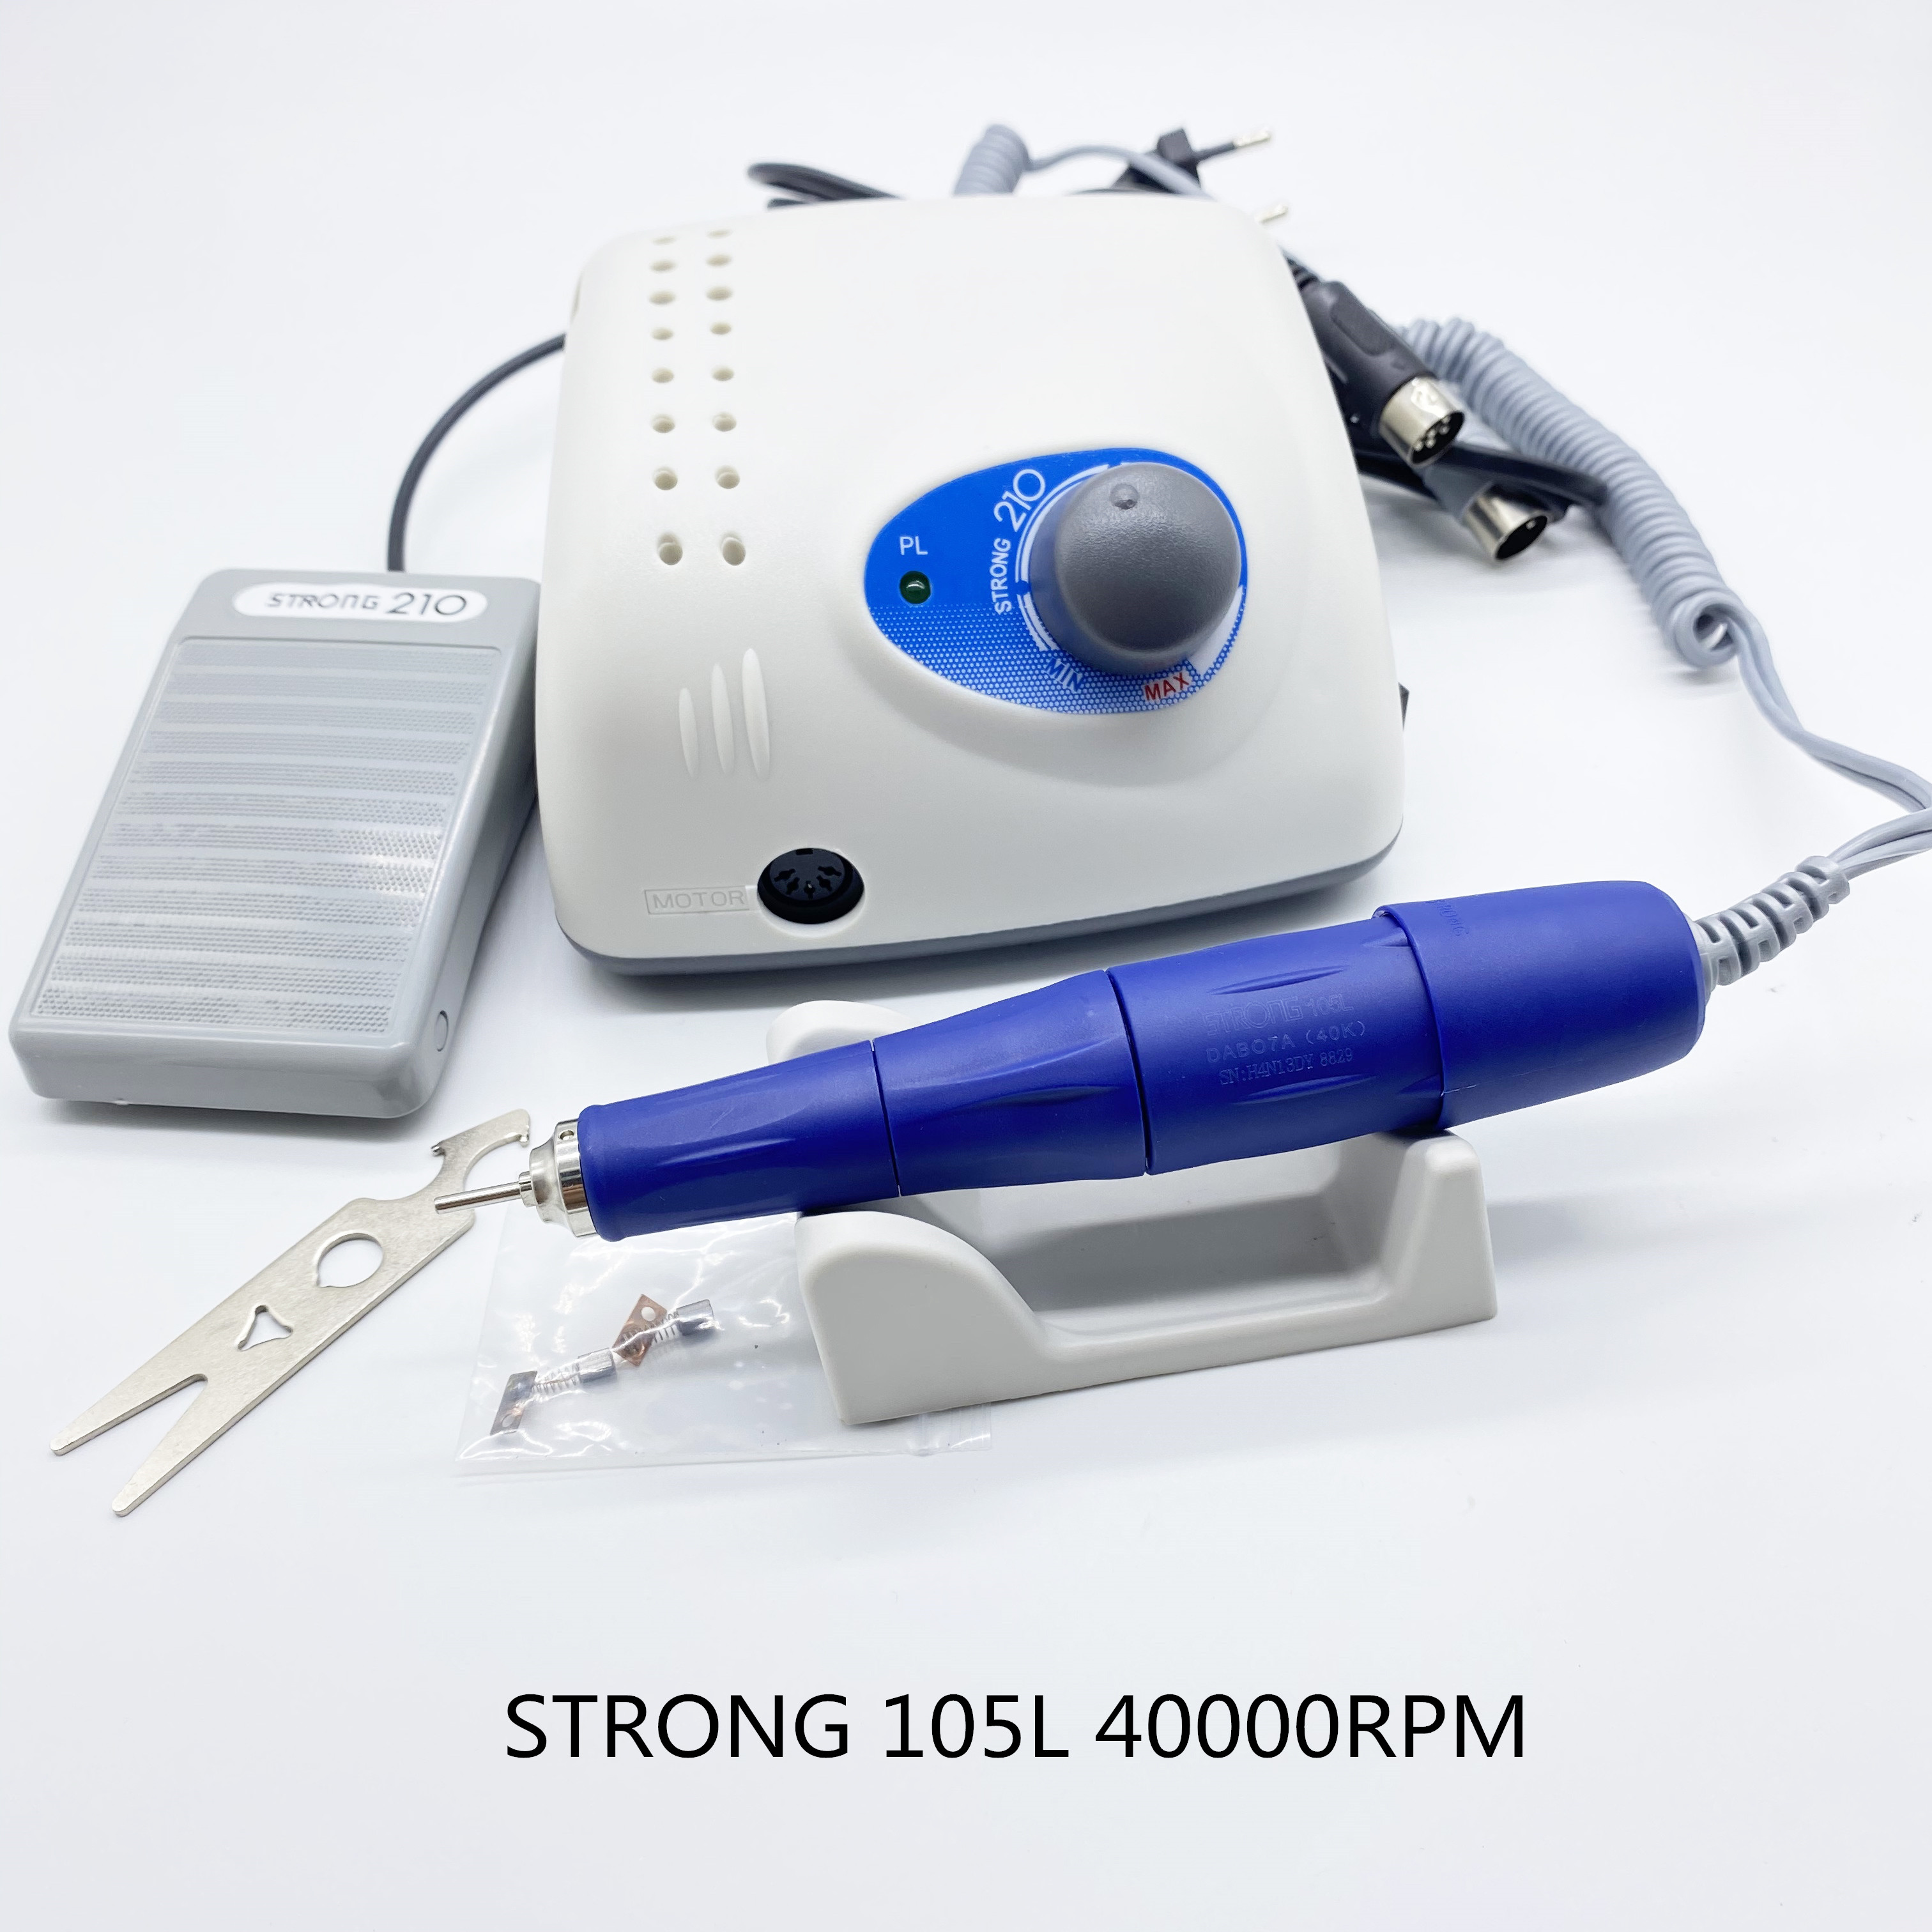 40000RPM Strong 210 Control Box strong 105L Micromotor Handpiece Electric Manicure Drill polishing Drill equipment Used for Nail